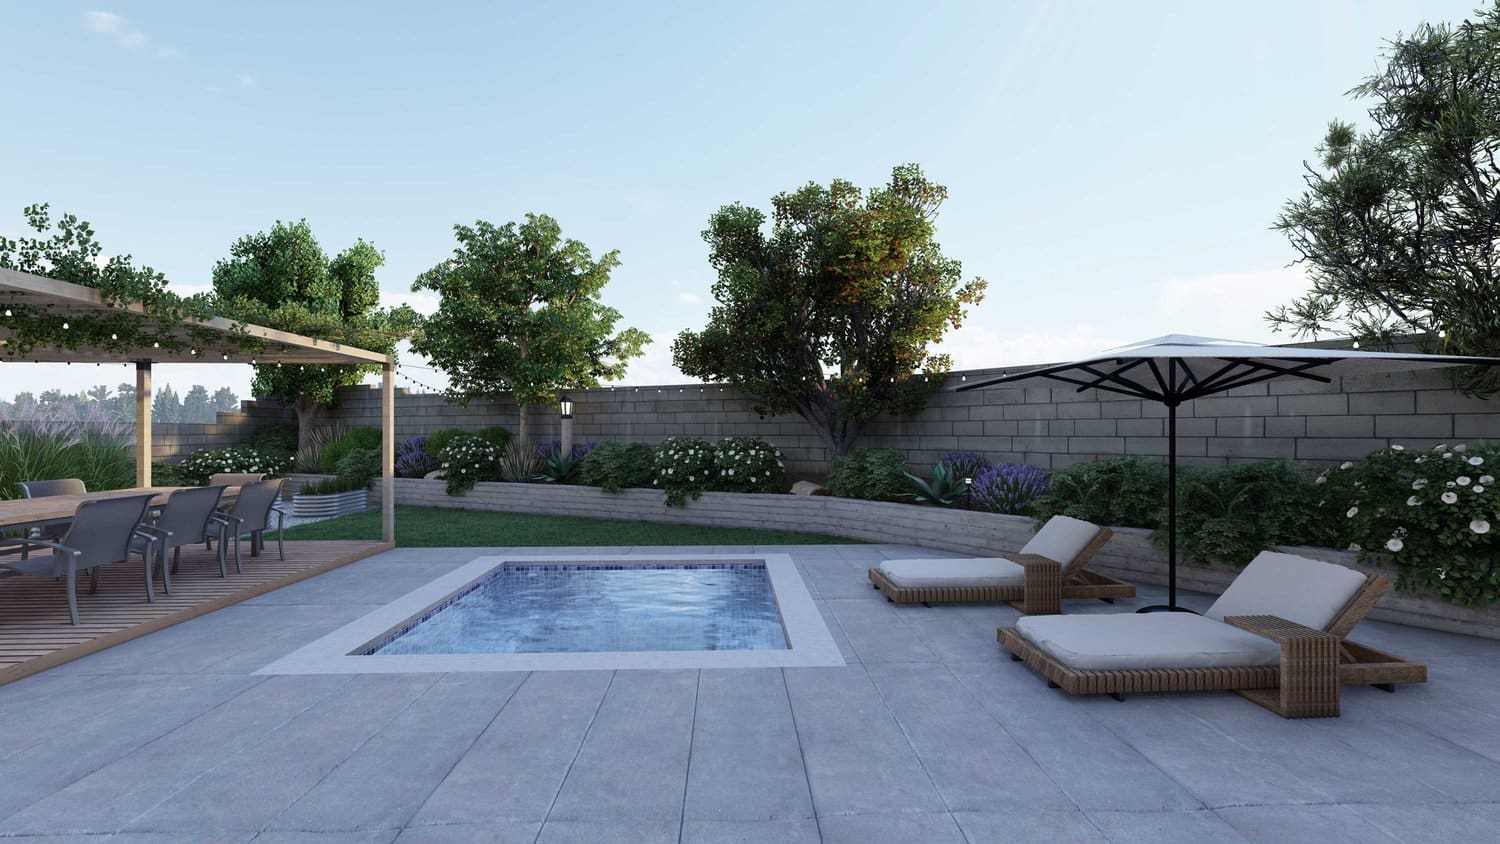 Thousand Oaks in-ground pool with concrete paver deck with lounge area in in fenced backyard beautified with flowers